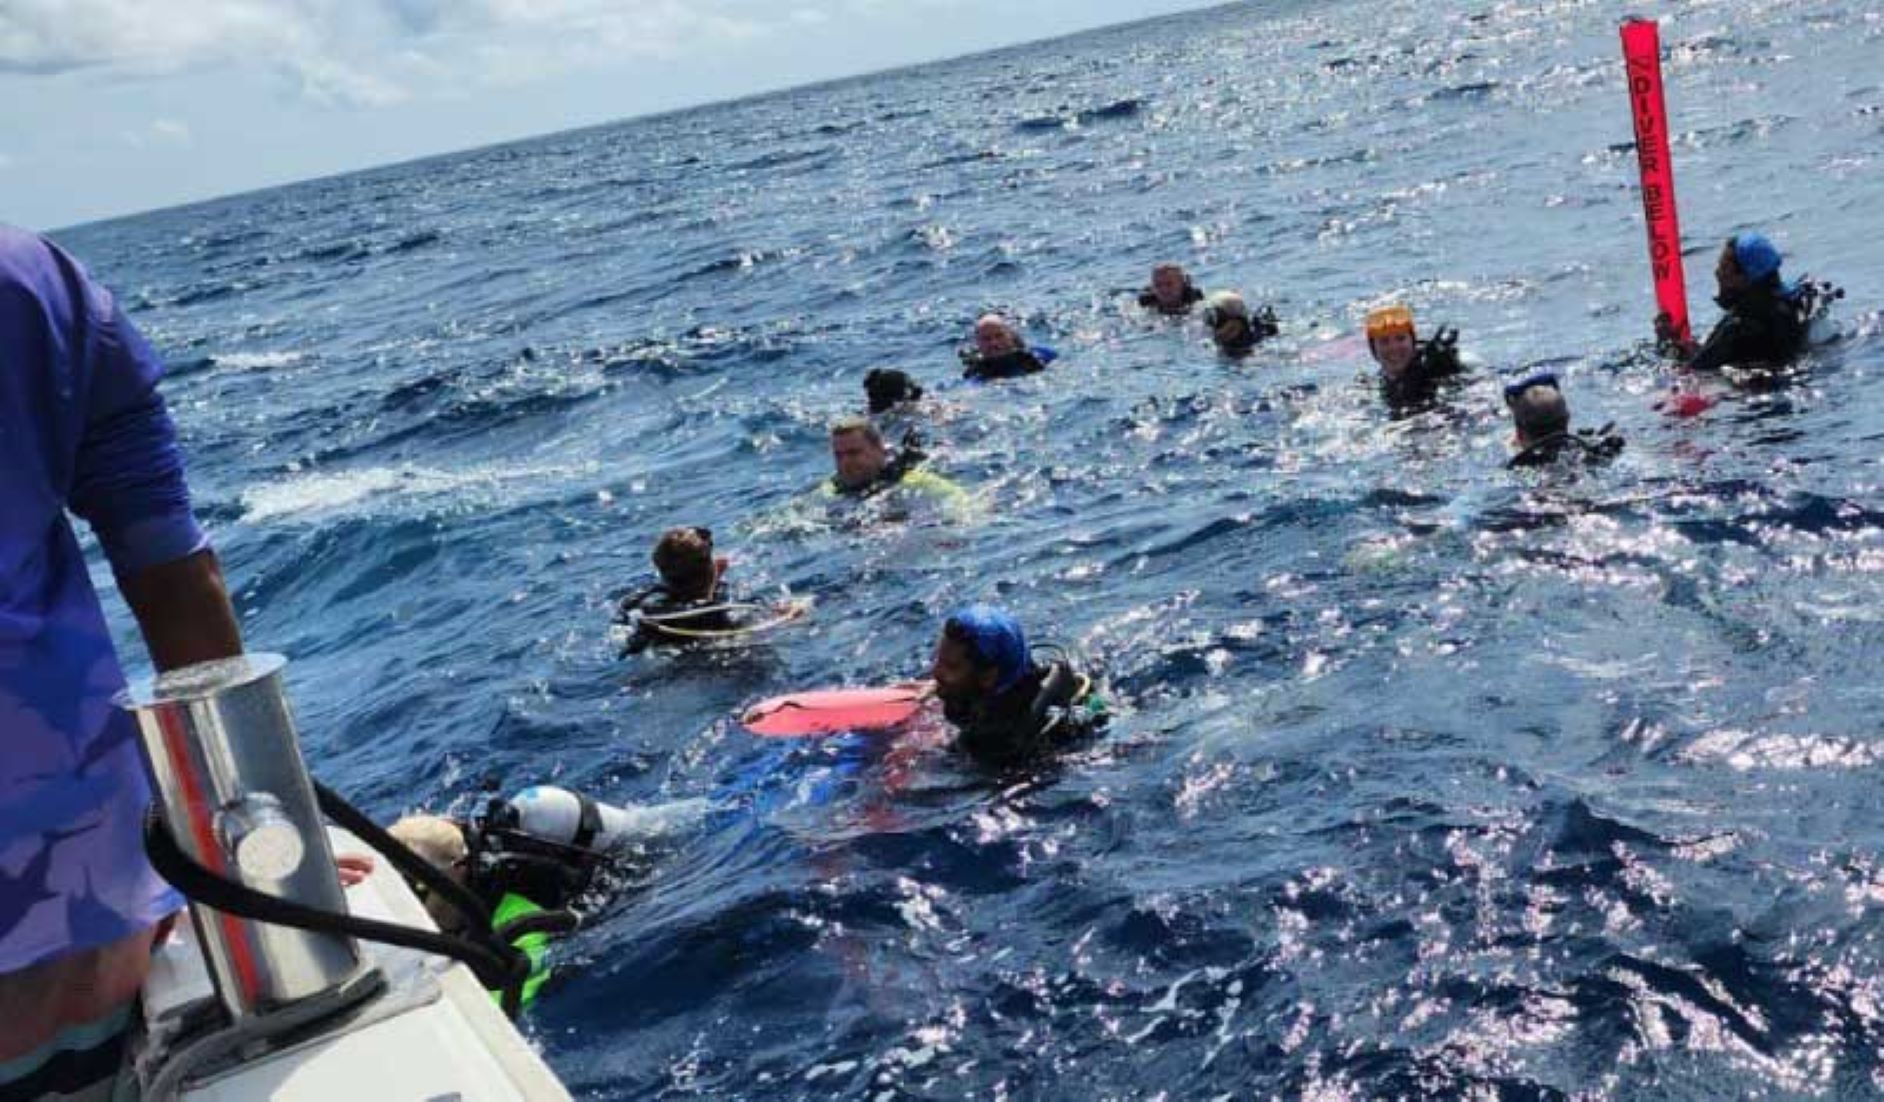 Maldives’ Police Rescued 13 People Adrift At Sea